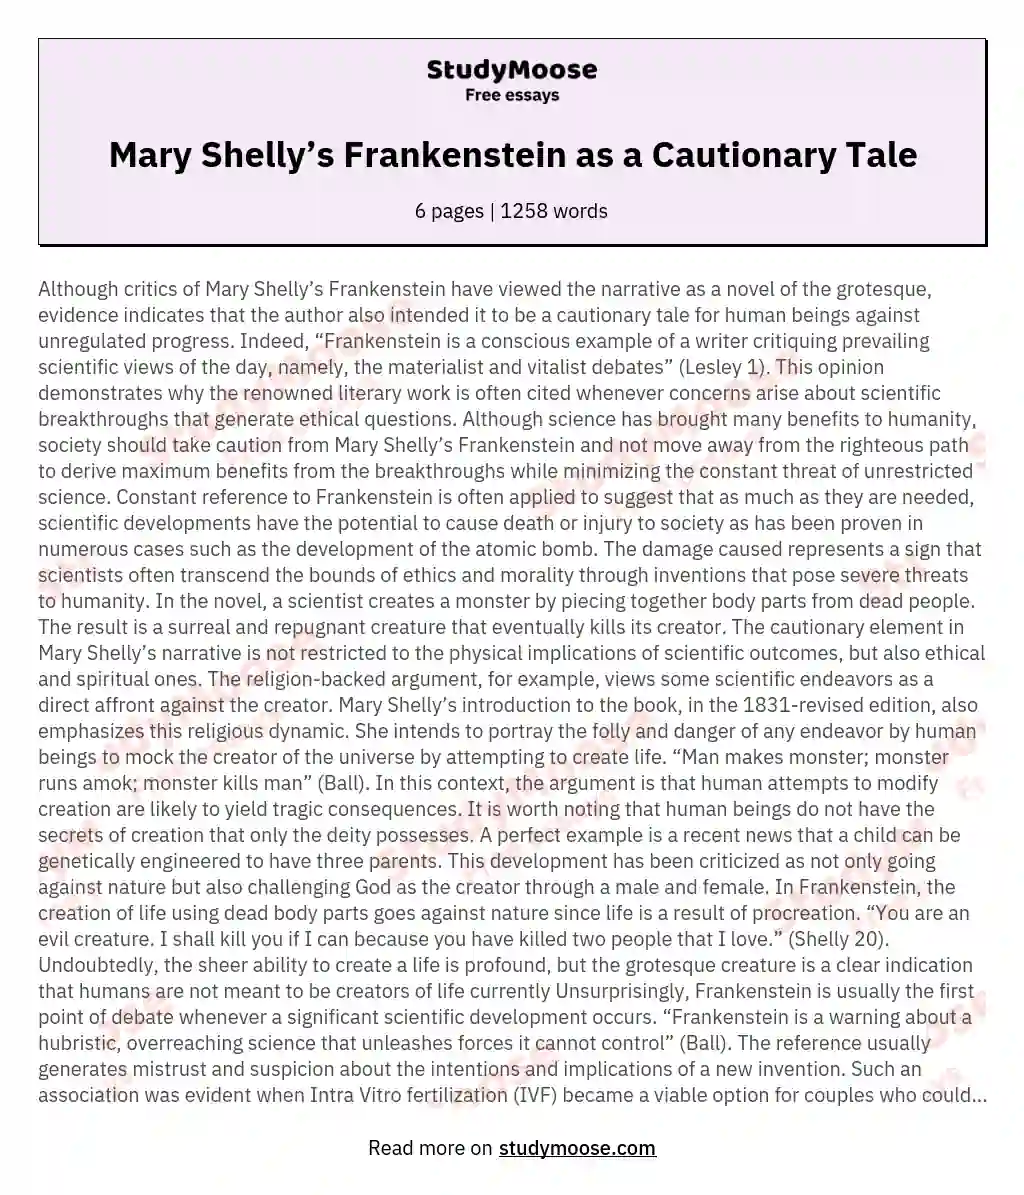 Mary Shelly’s Frankenstein as a Cautionary Tale essay